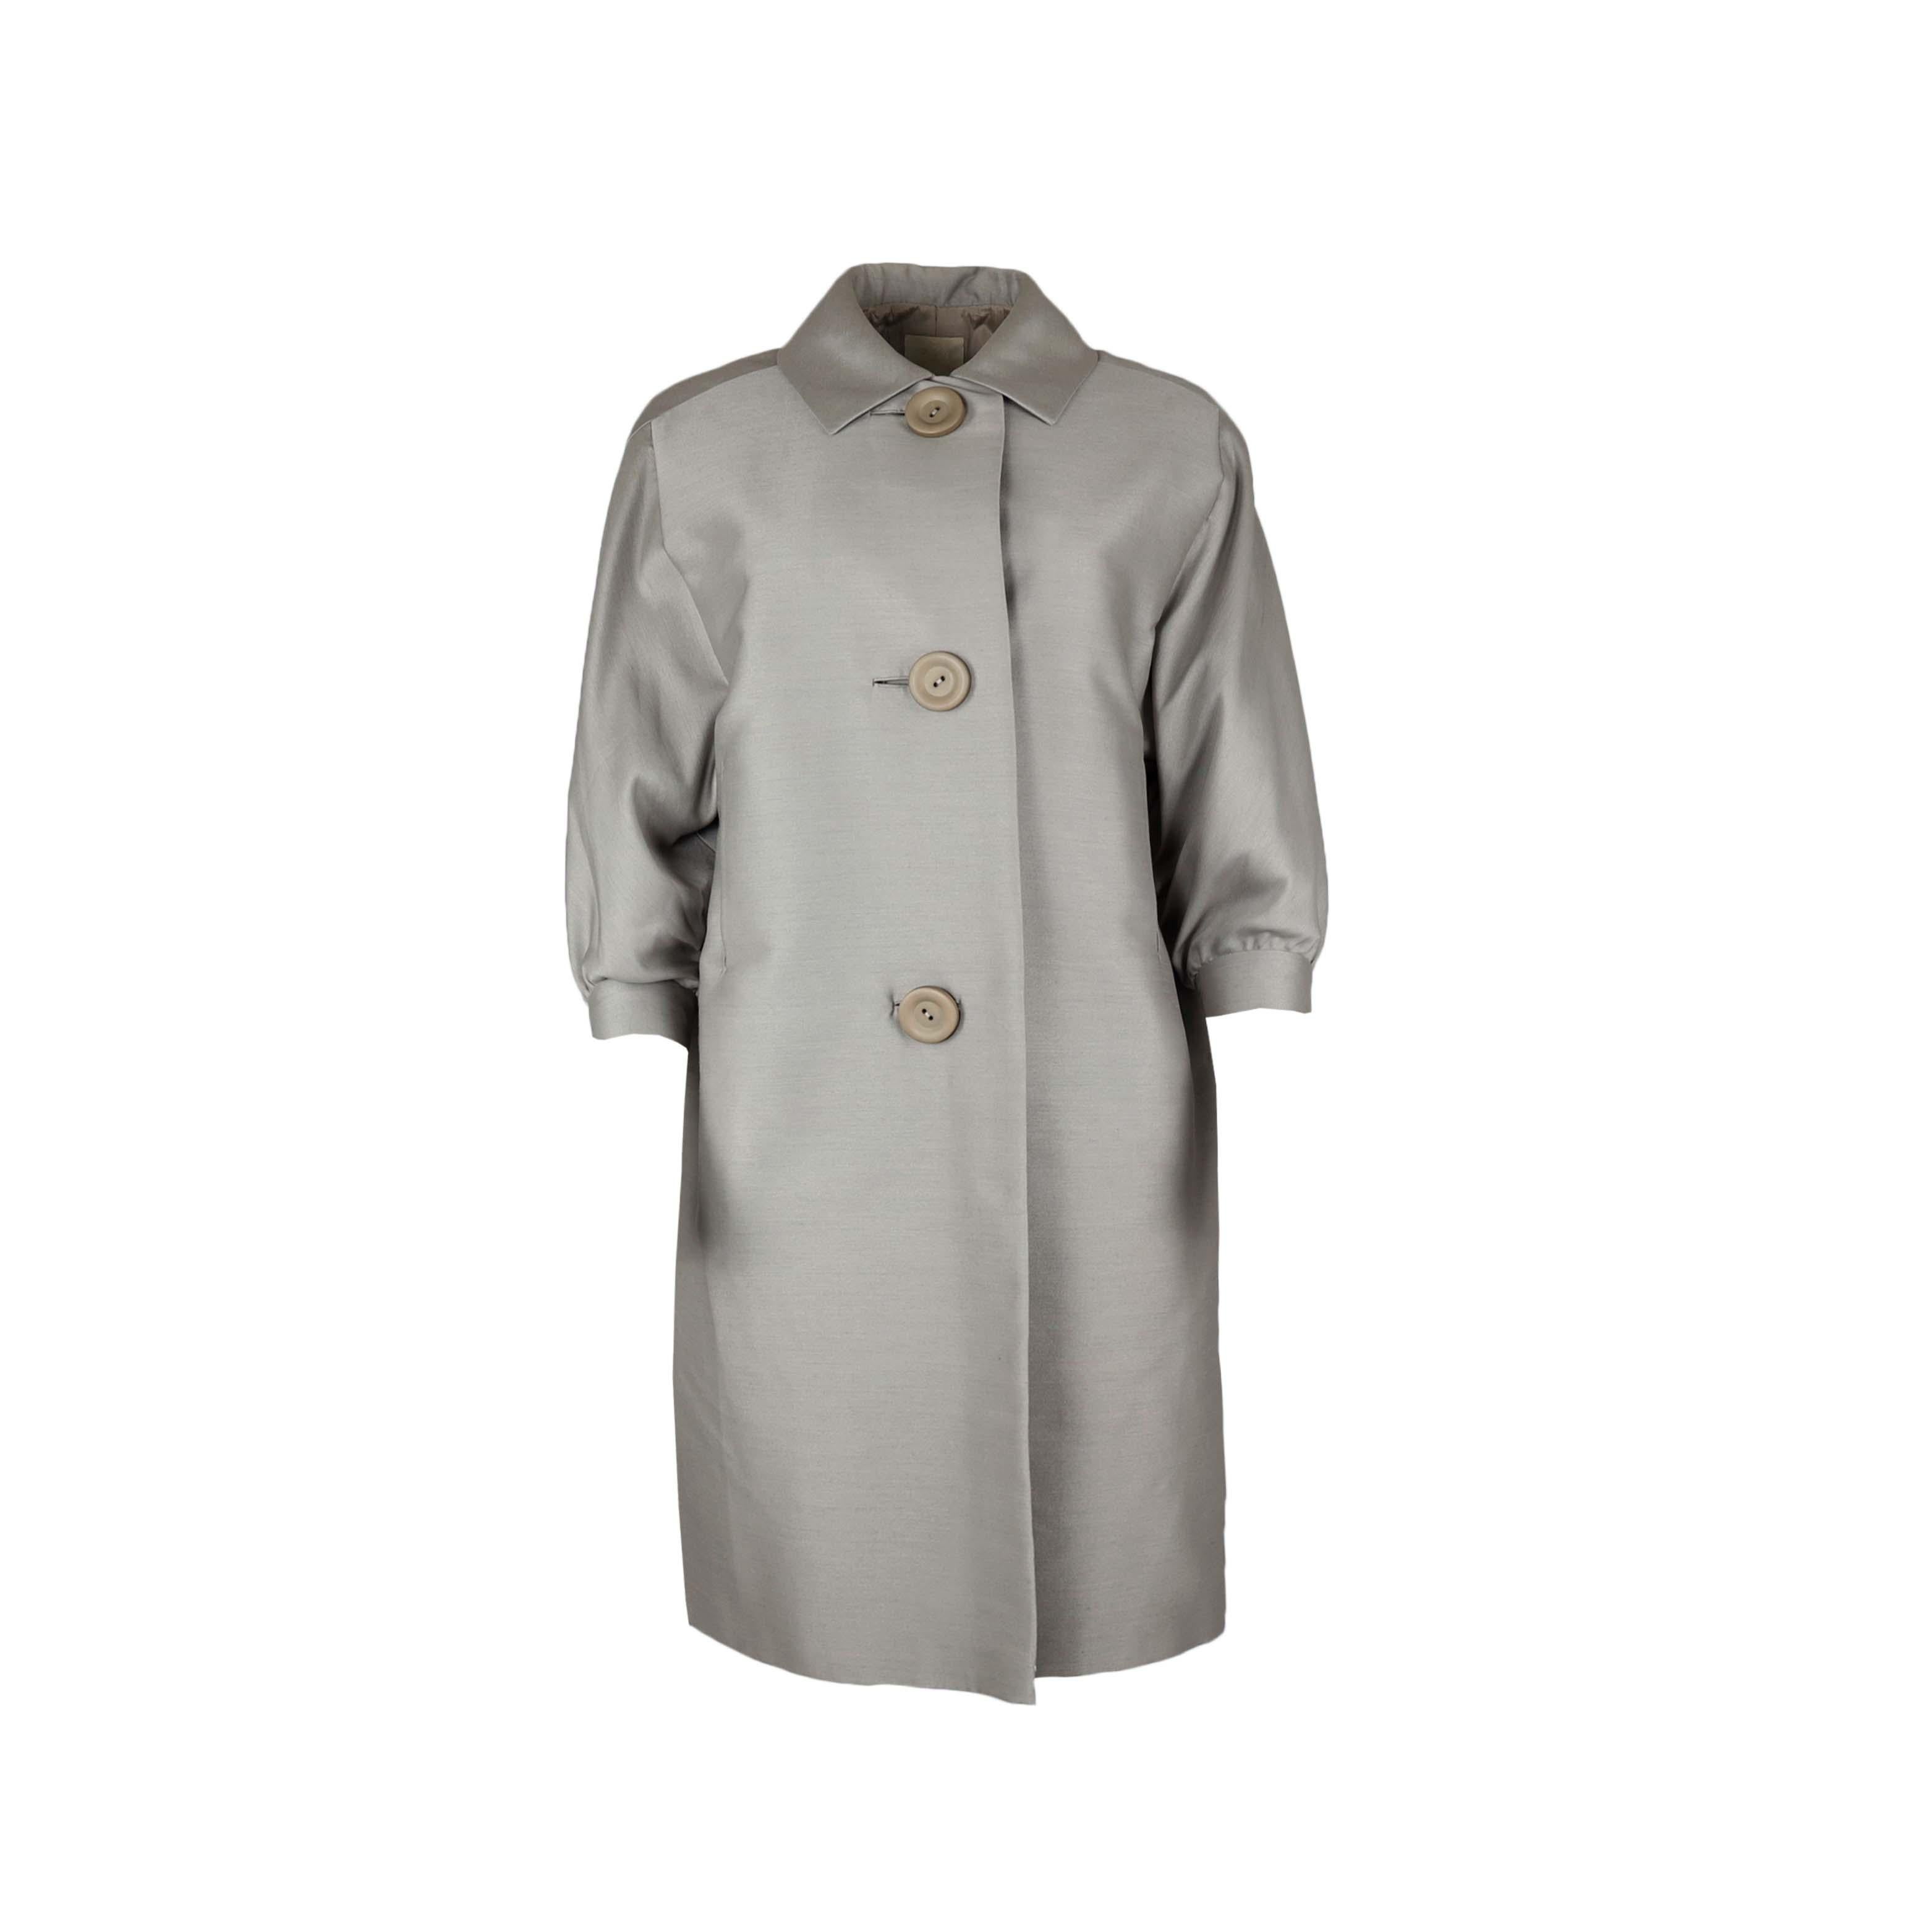 Nina Ricci Coat In Good Condition For Sale In Milano, IT